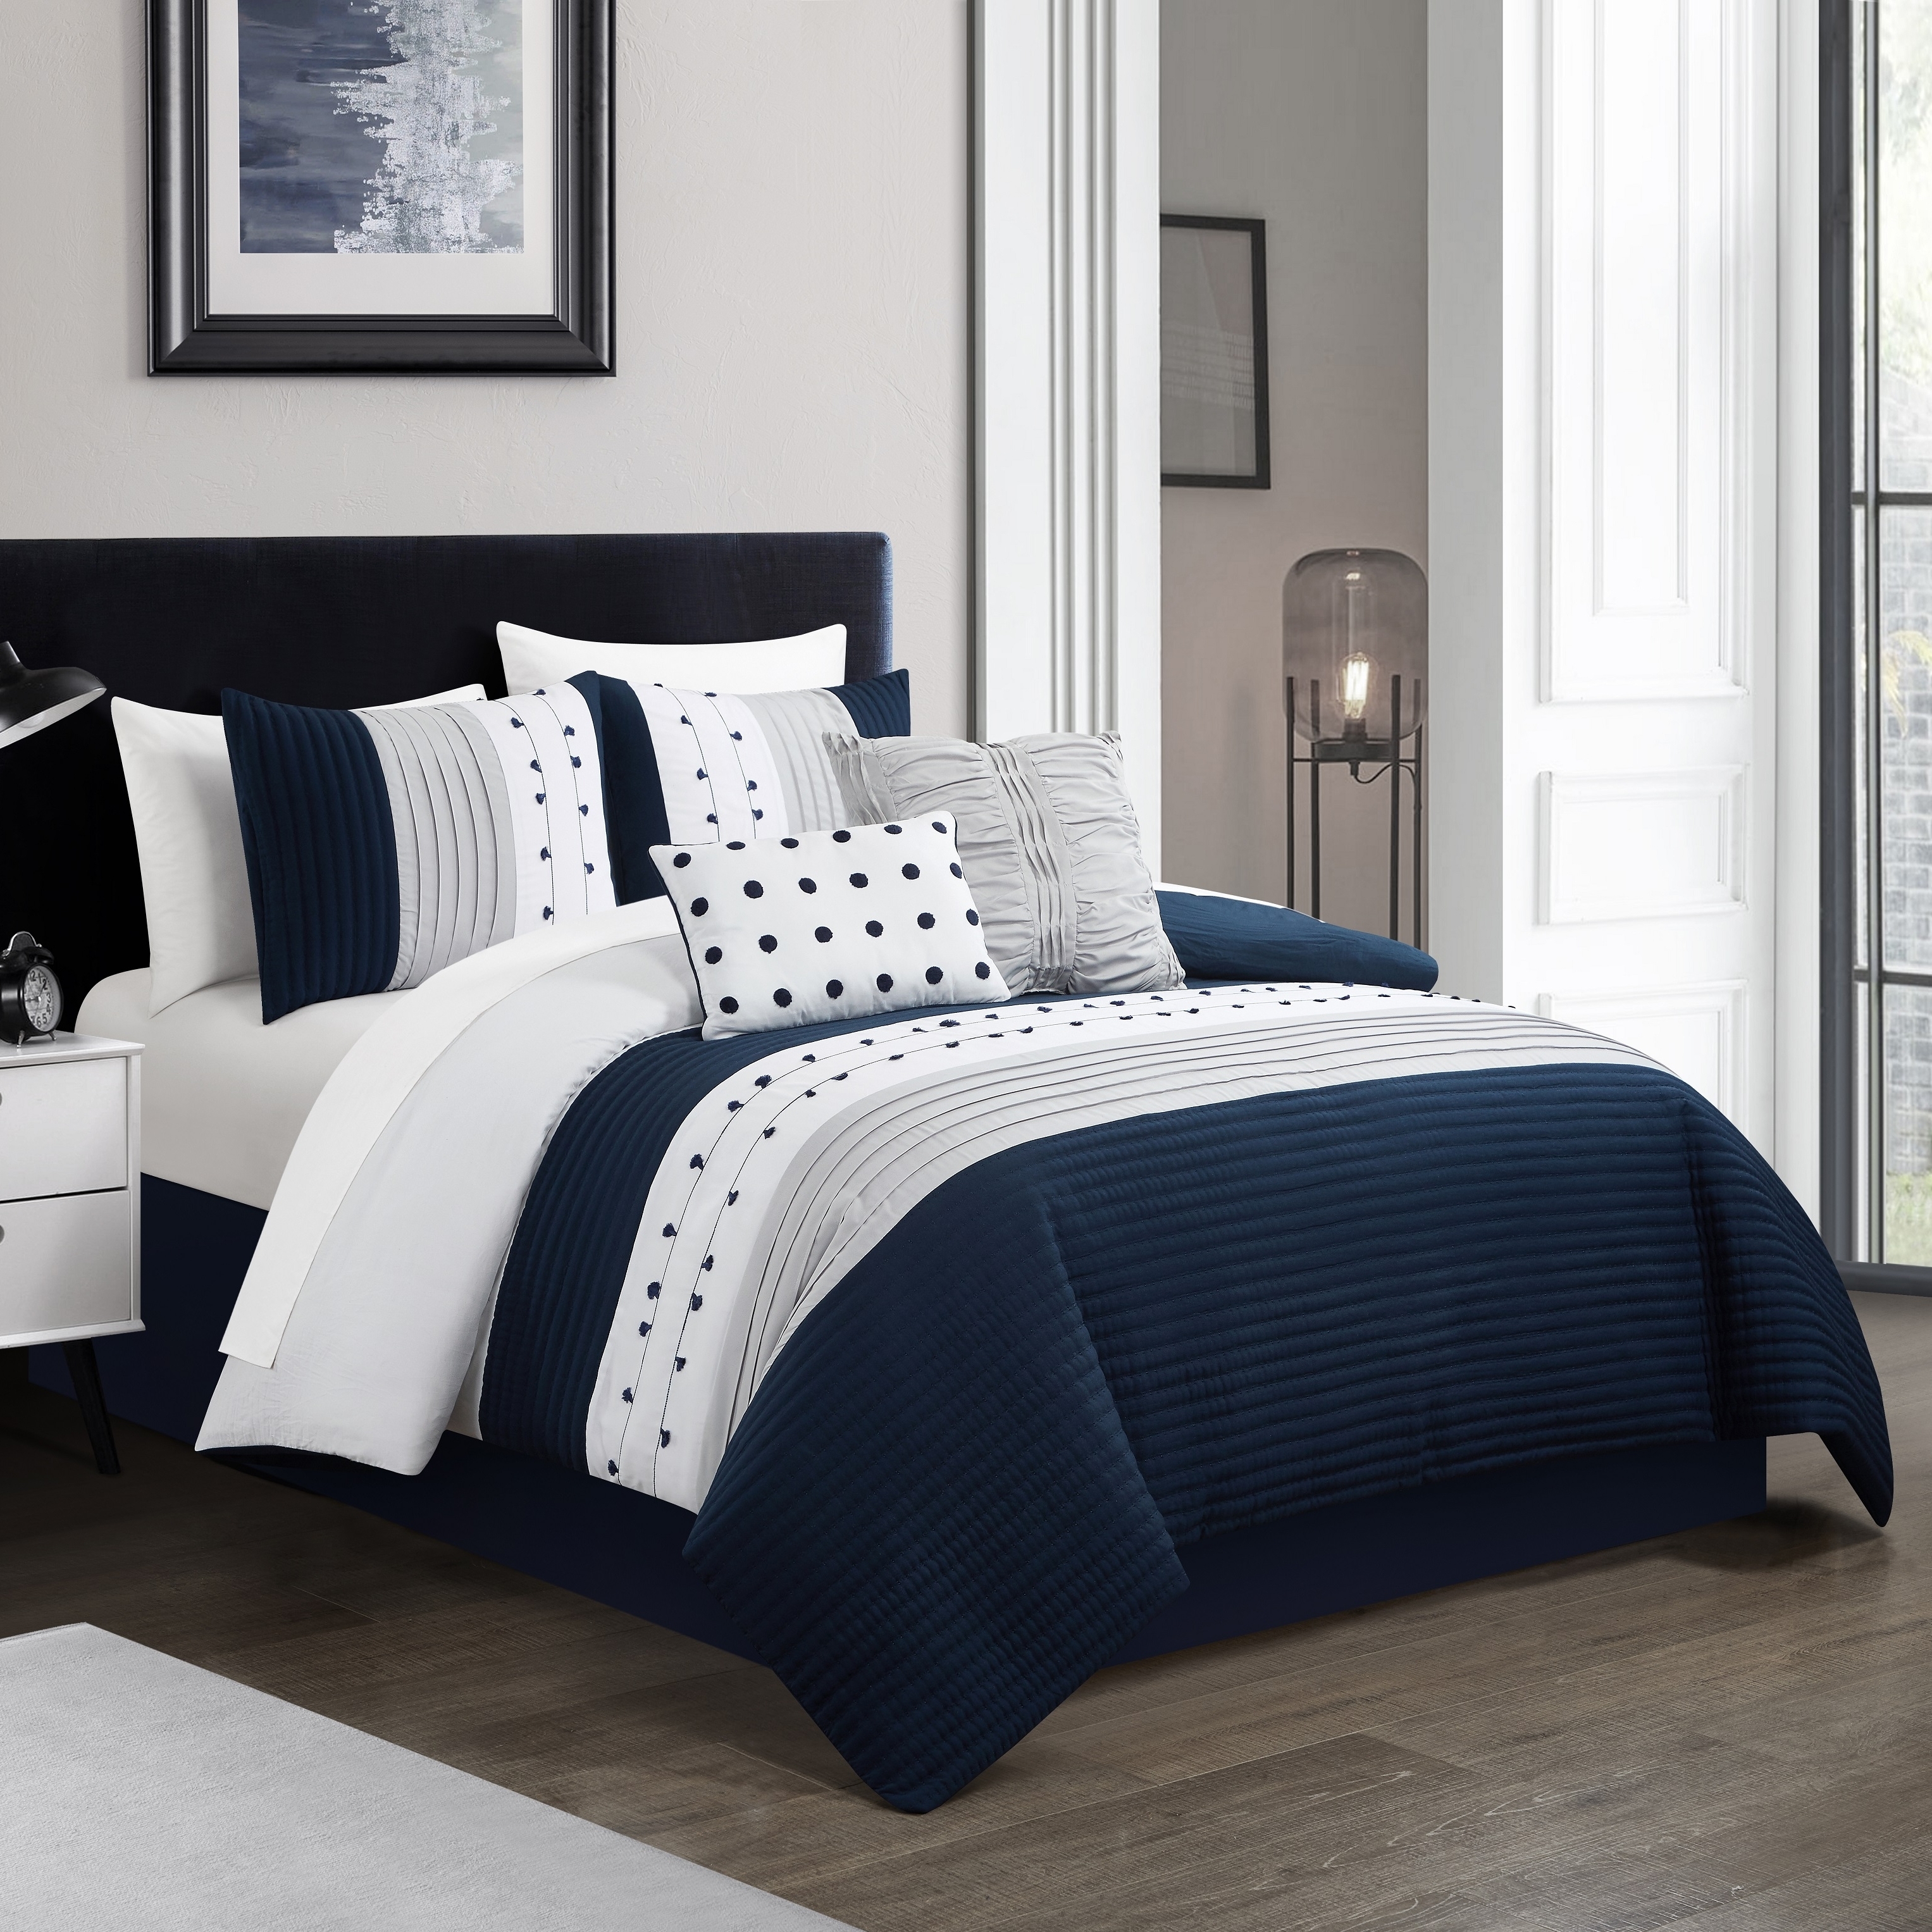 Lainy 5 Piece Comforter Set Color Block Pleated Ribbed Embroidered Bedding - Navy, King